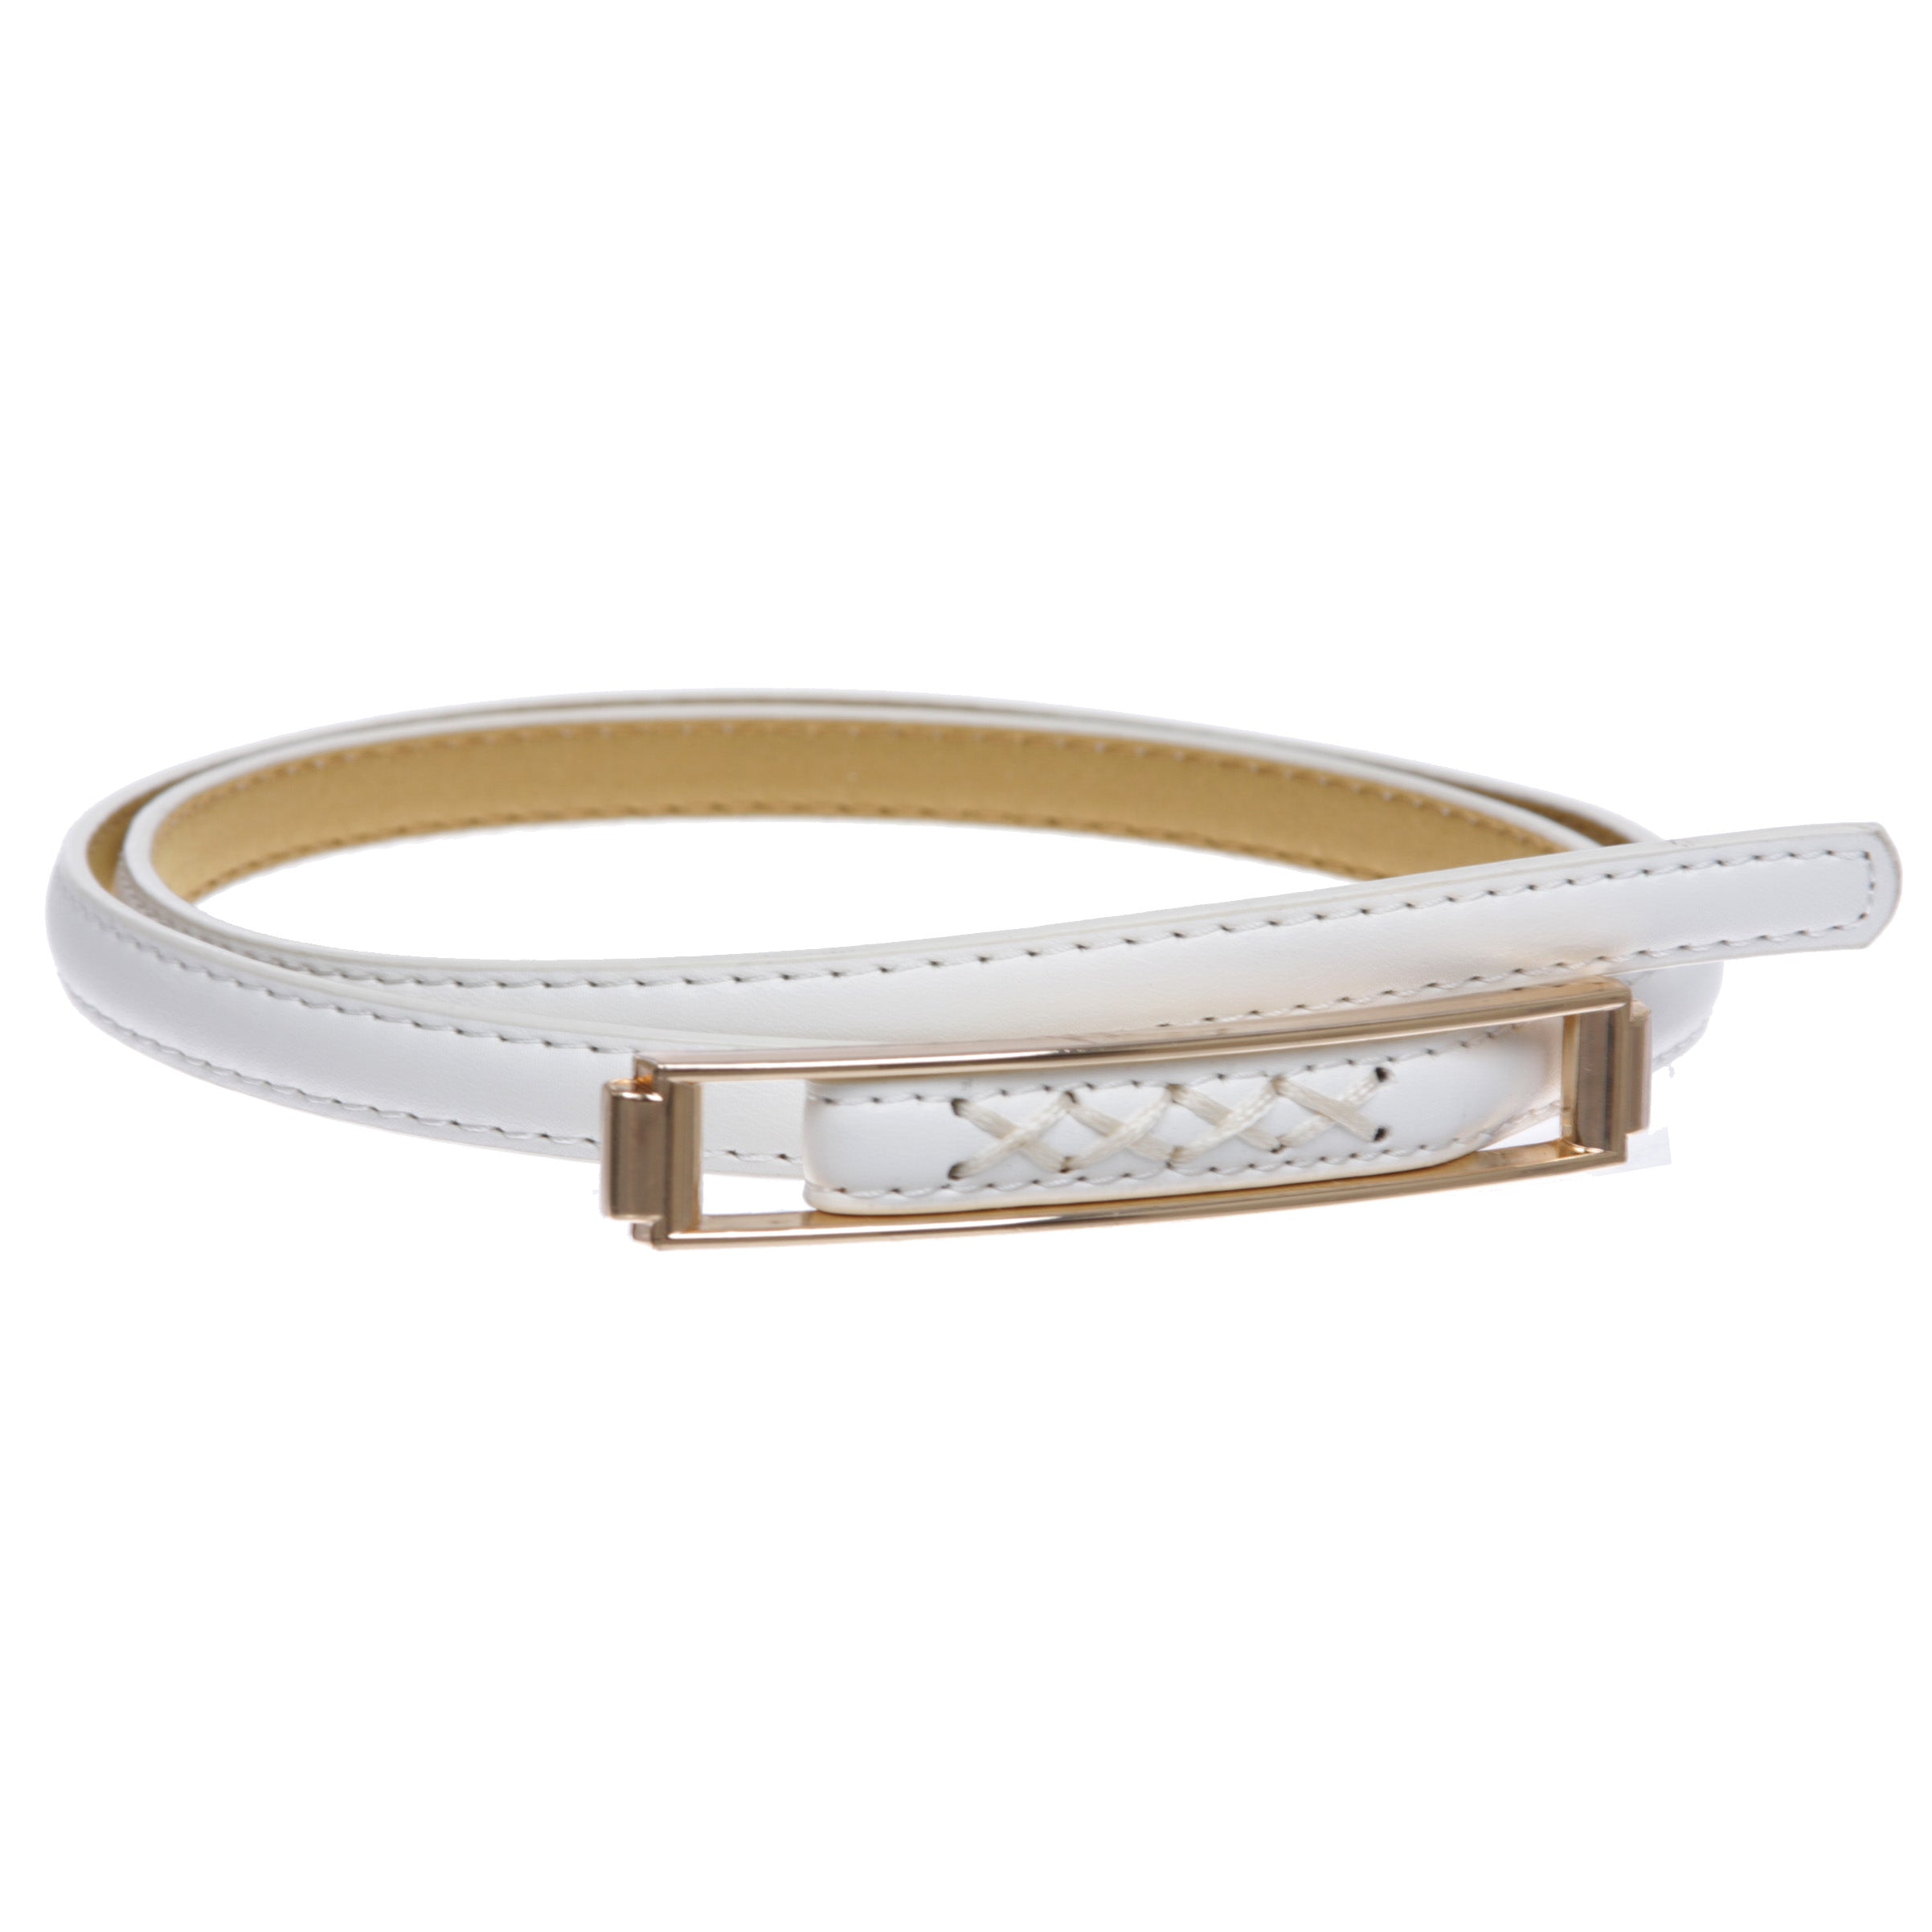 Womens Thin Belts Skinny Faux Leather Stitch Belt with Gold Tone Buckle